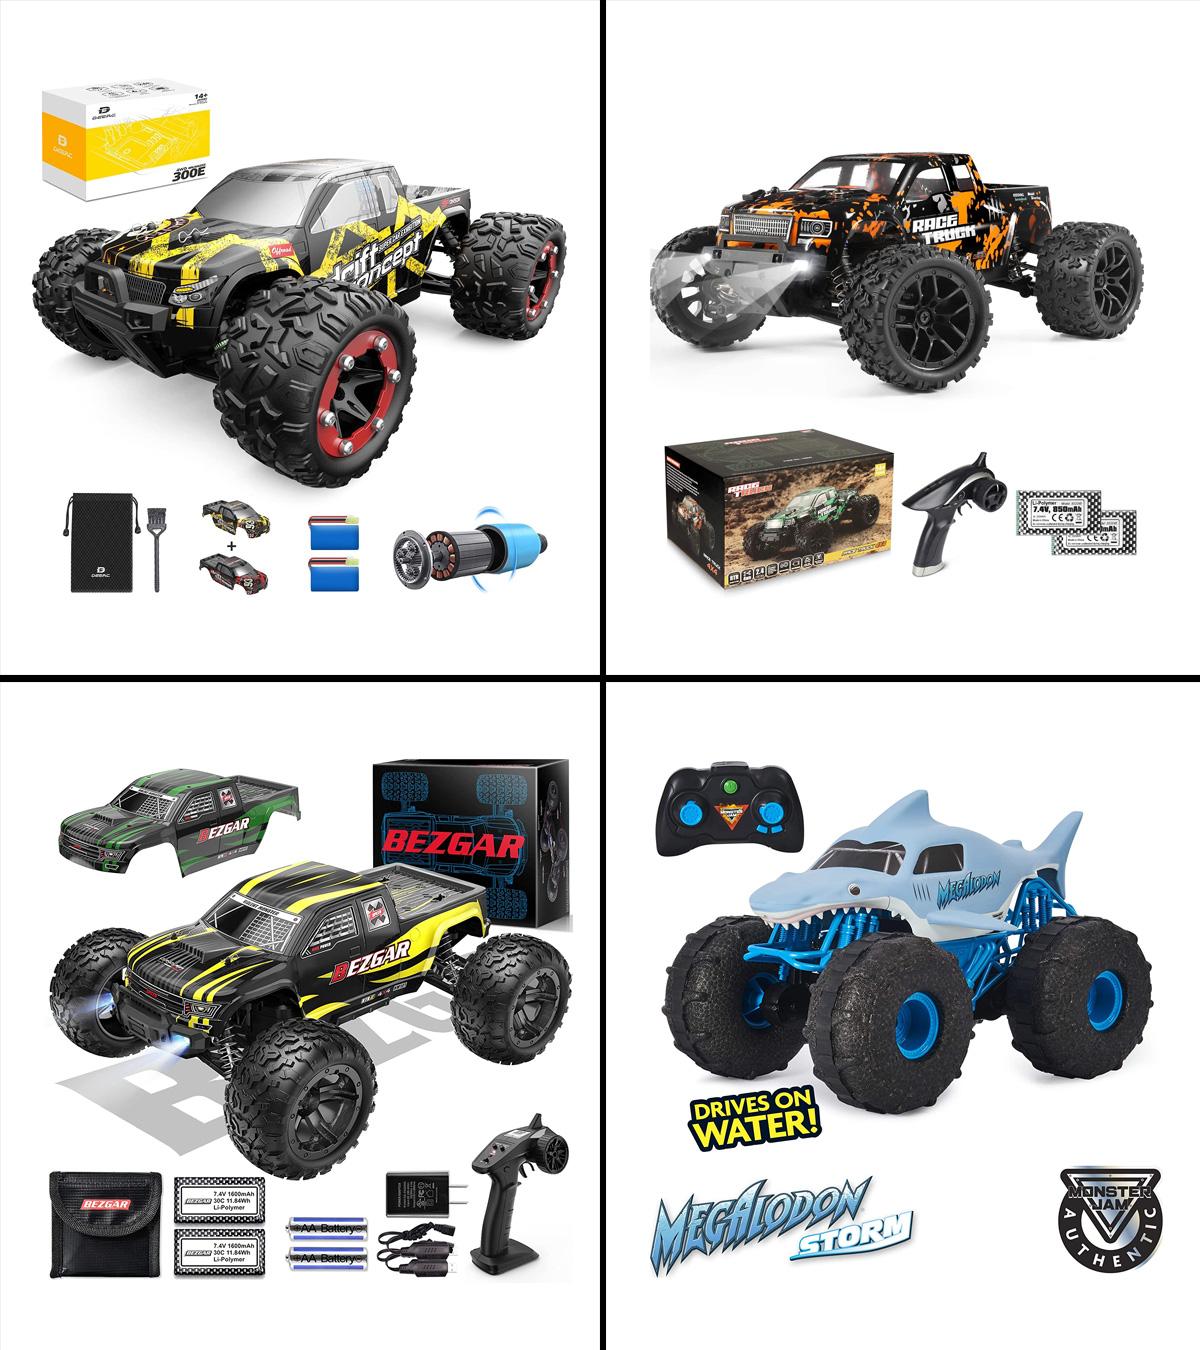 Best Electric Rc Monster Truck: Top Electric RC Monster Trucks for Novice Enthusiasts 